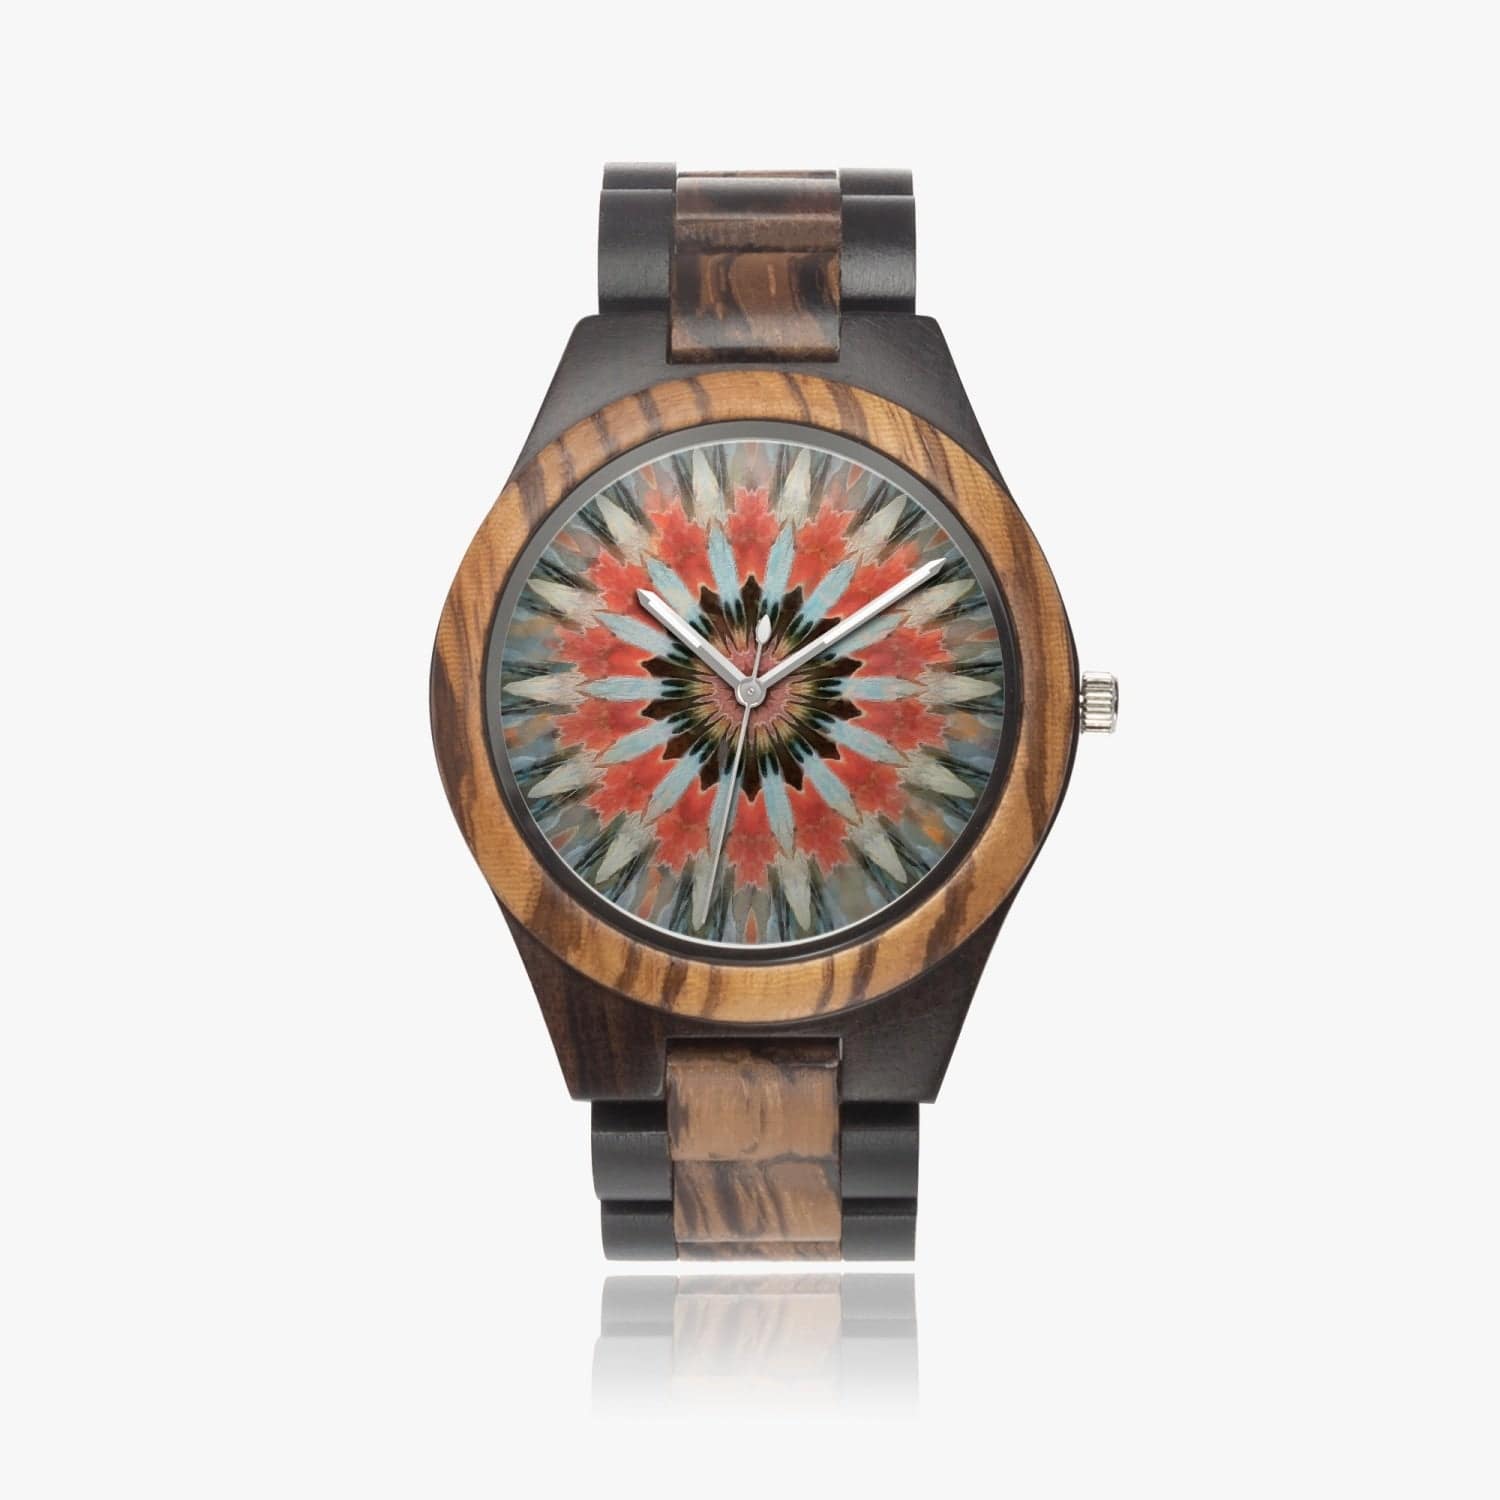 Fairytale Intersected Wooden Watch by Sensus Studio